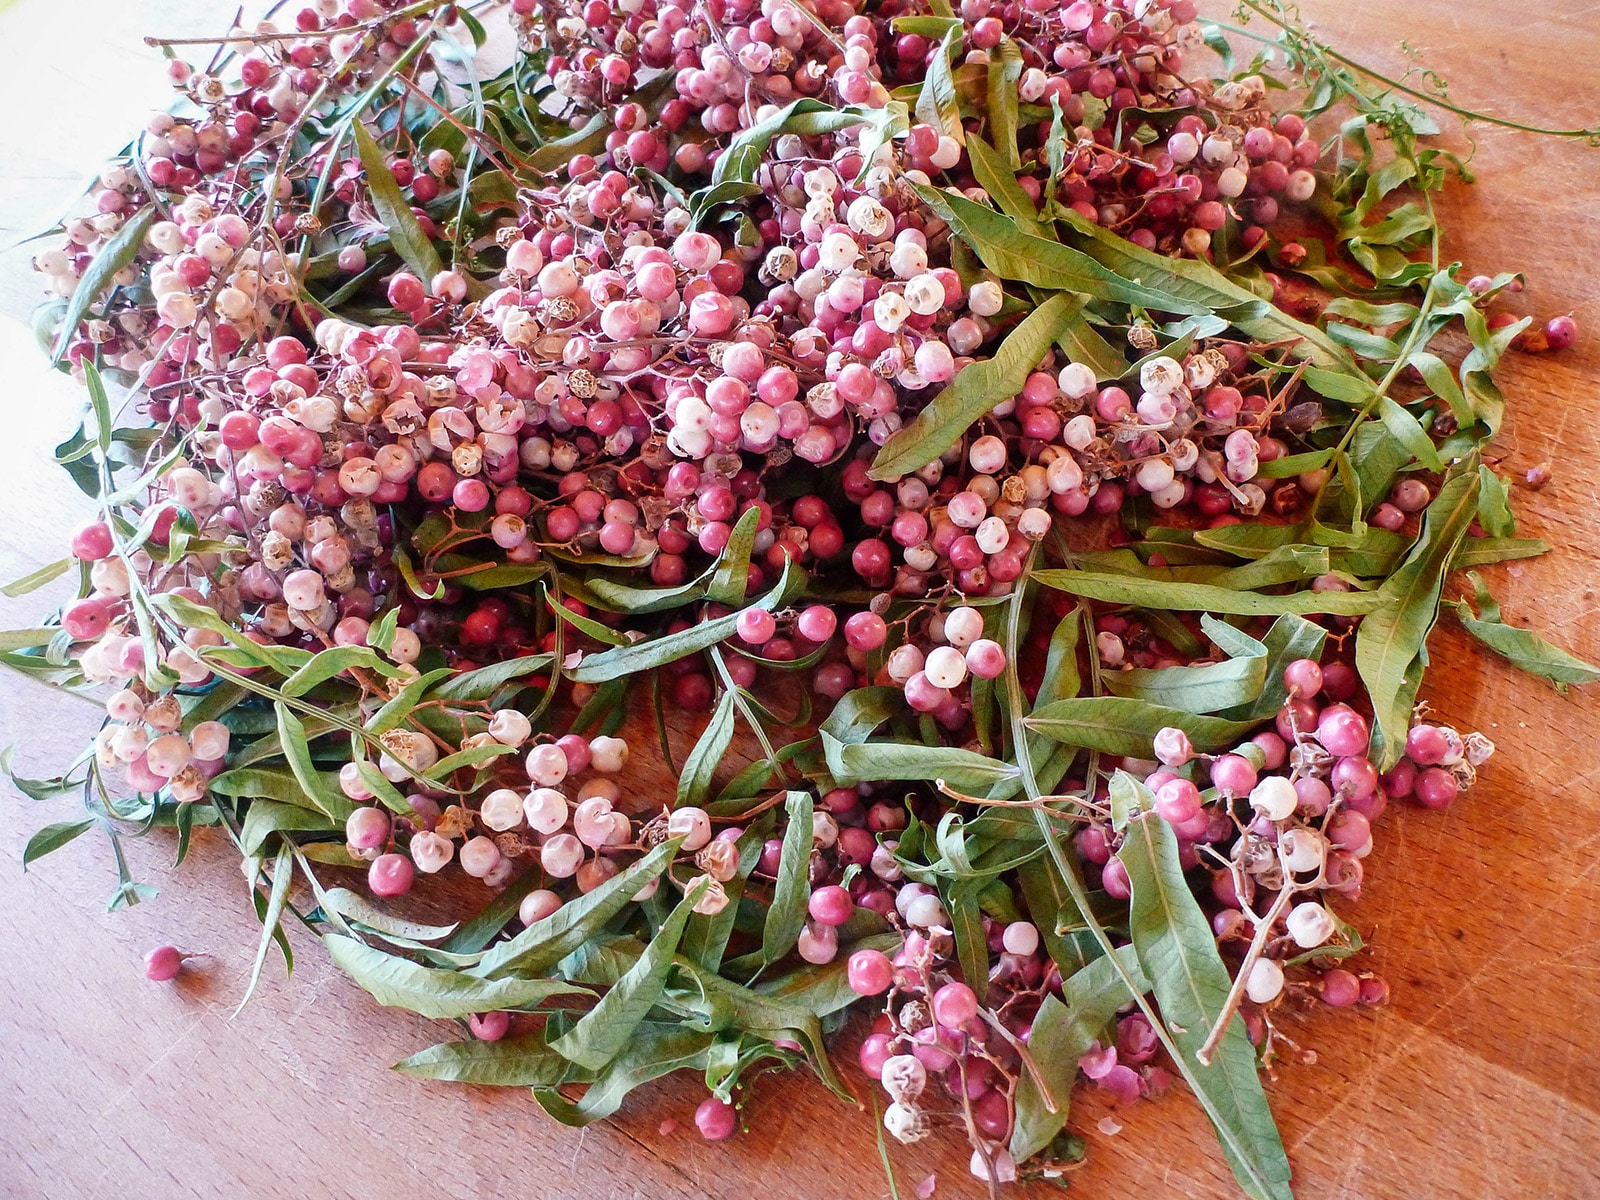 A cluster of freshly harvested pink pepper berries on stems